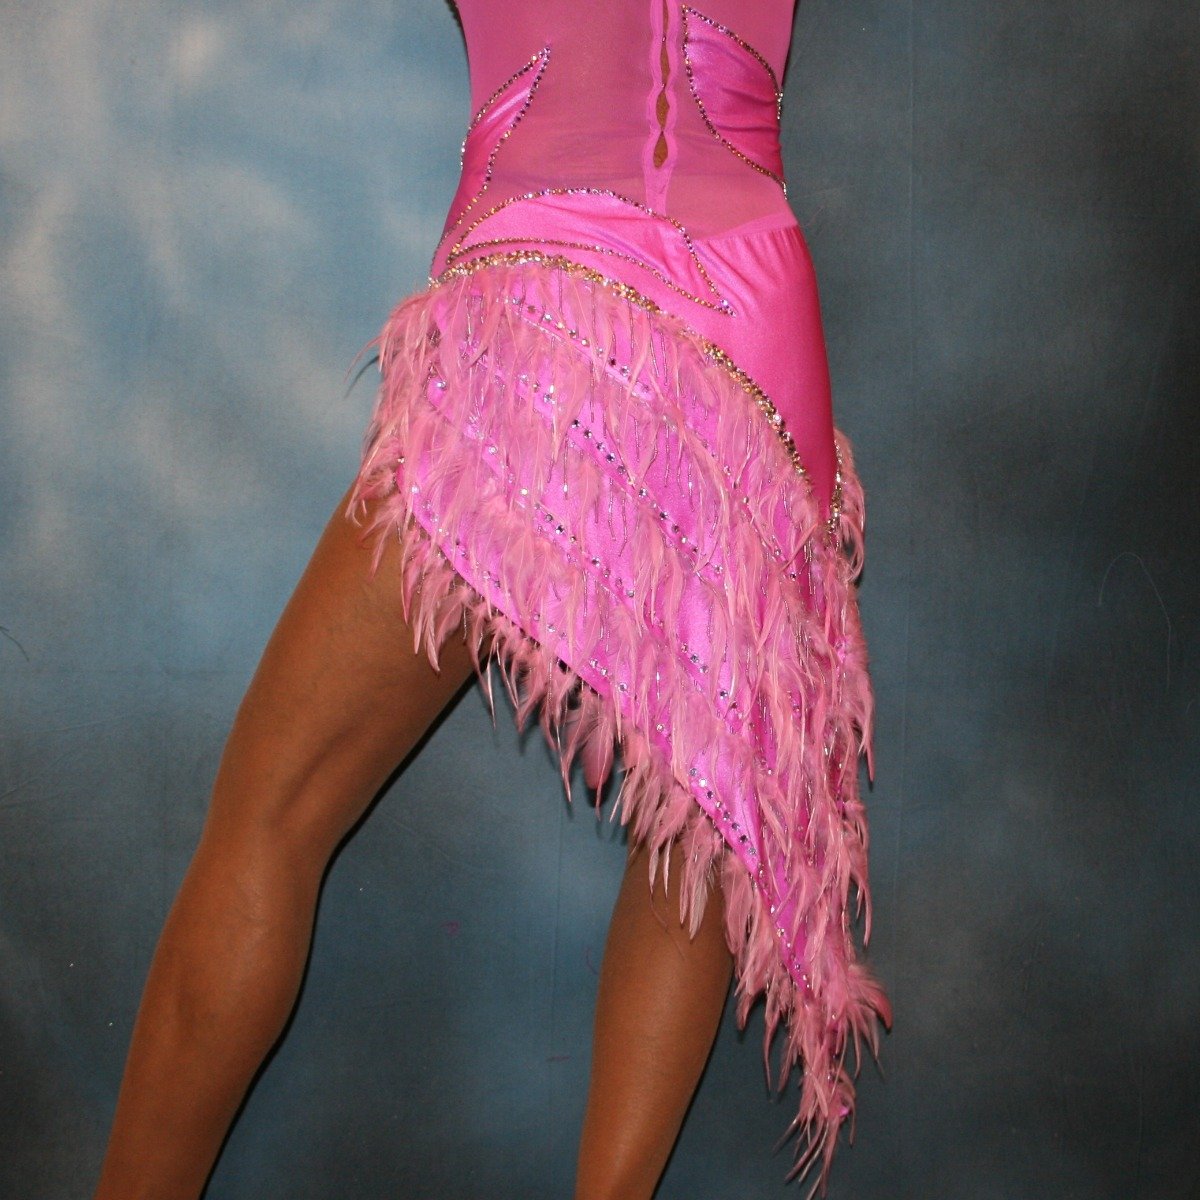 Crystal's Creations bottom back view of Orchid Latin/rhythm dress created in orchid lycra on an orchid sheer mesh base with detailed applique work, embellished with Swarovski rhinestone work in crystal vitrail light, along with orchid feather fringe.